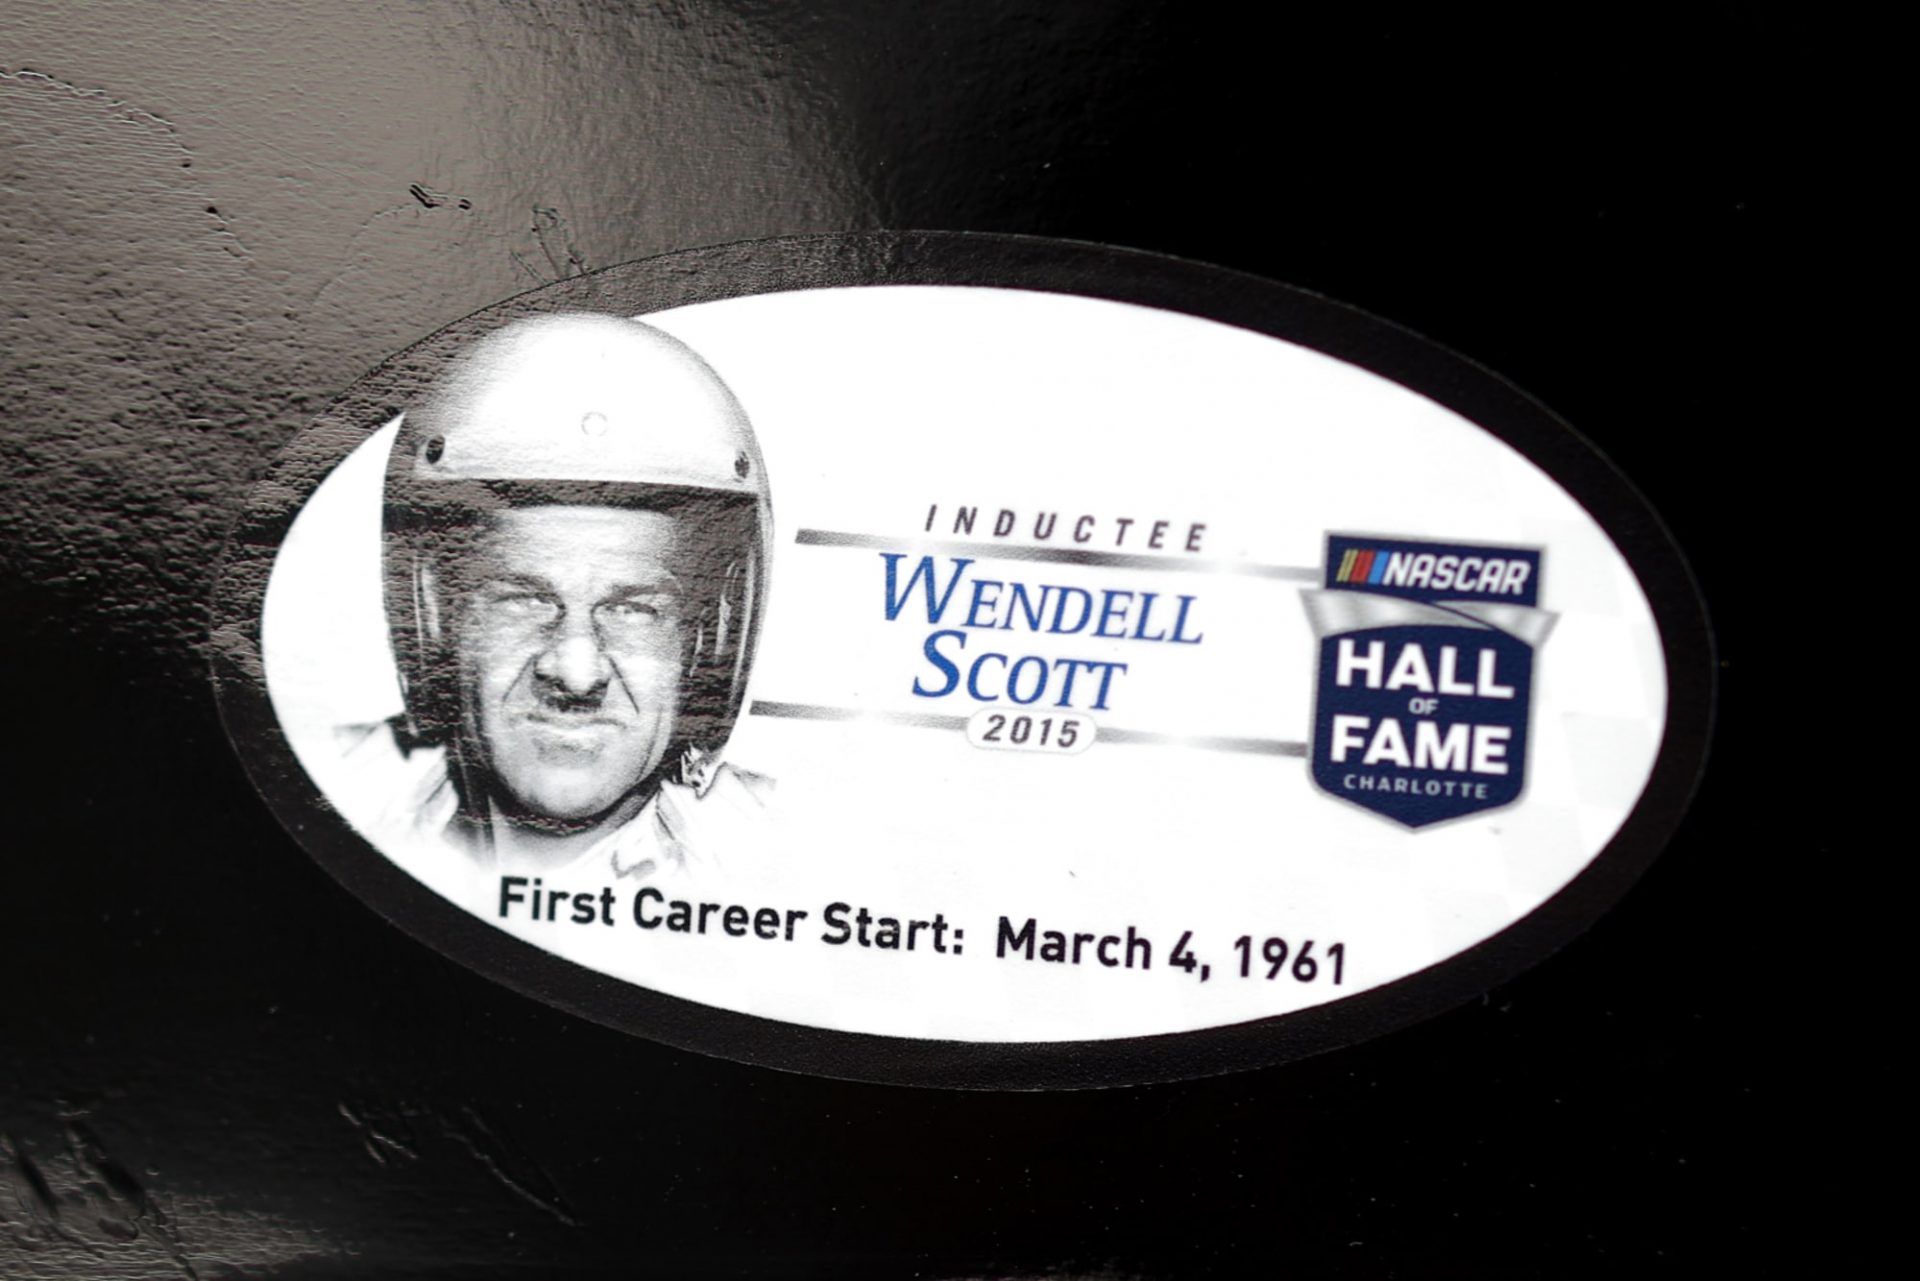 Wendell Scott drove by racism to turn into a NASCAR Hall of Famer